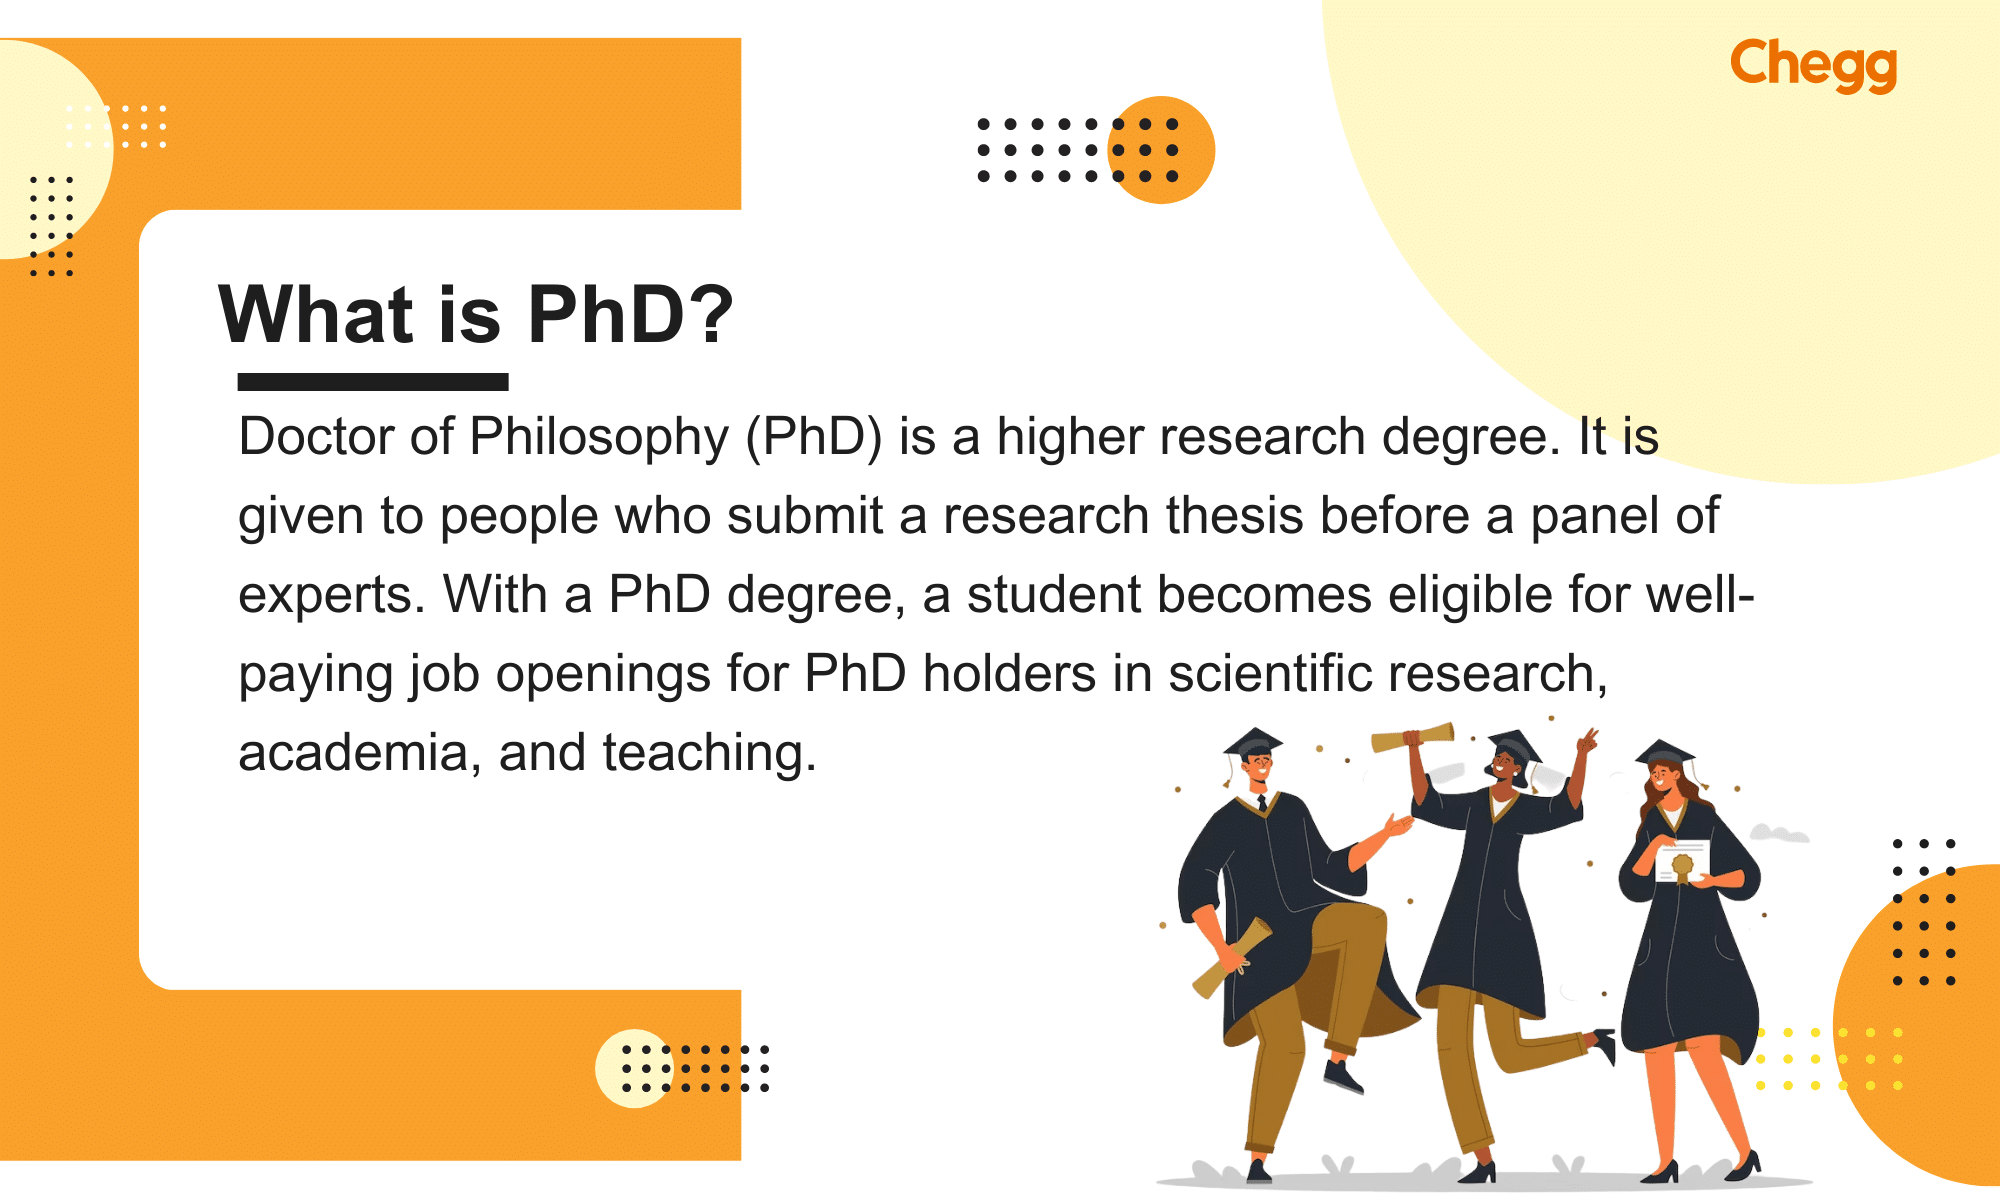 phd degree duration in india